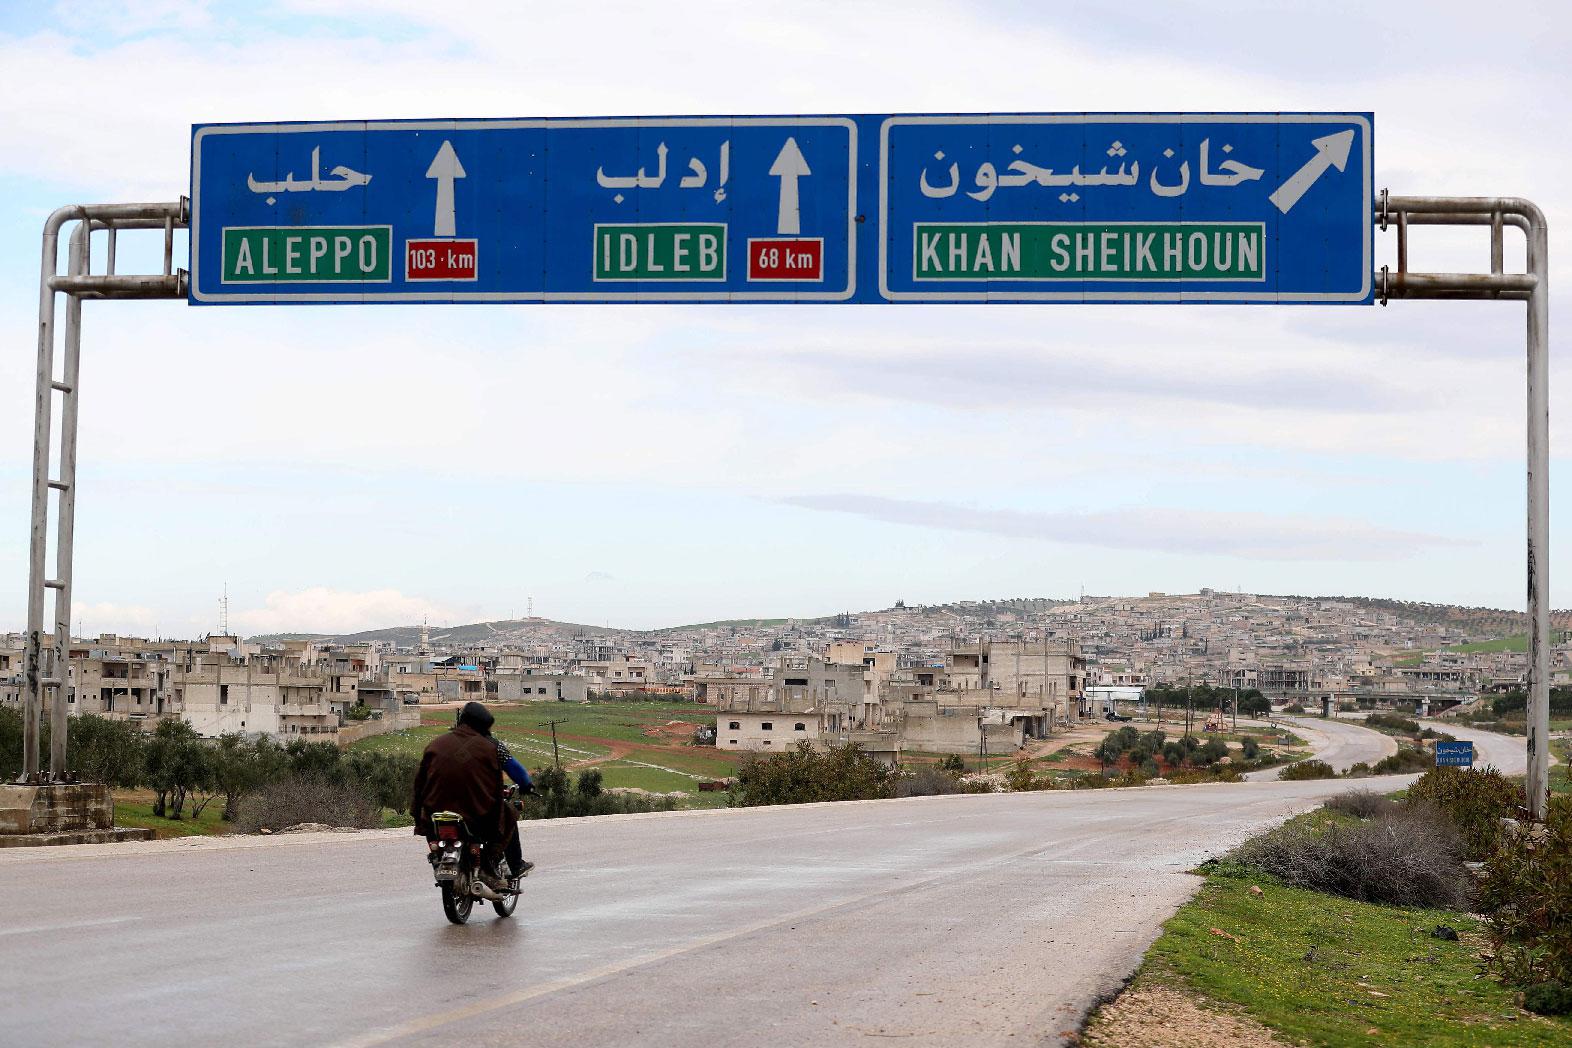 Two Syrian men drive past road signs in Khan Sheikhun on February 28, 2019.